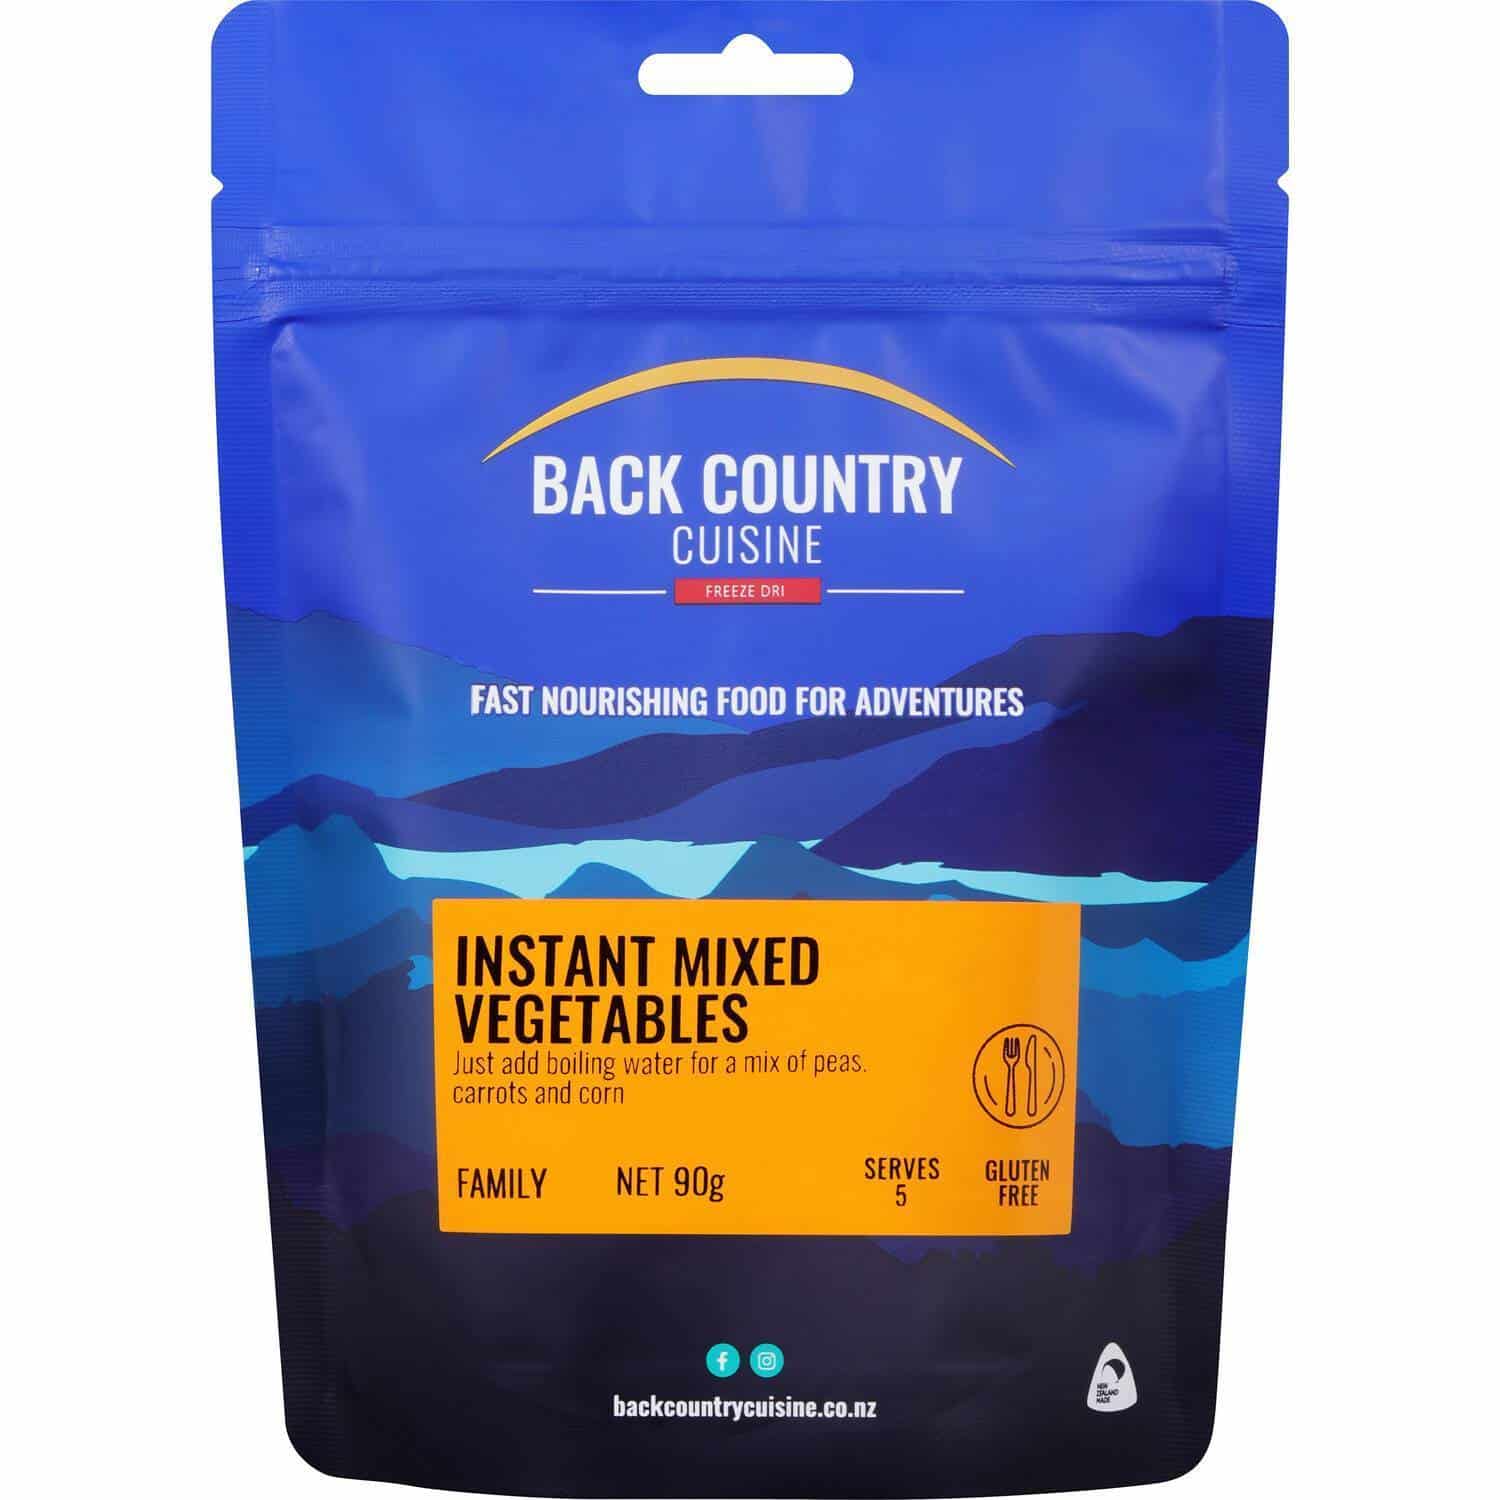 Back Country Cuisine Instant Mixed Vegetables - Tramping Food and Accessories sold by Venture Outdoors NZ